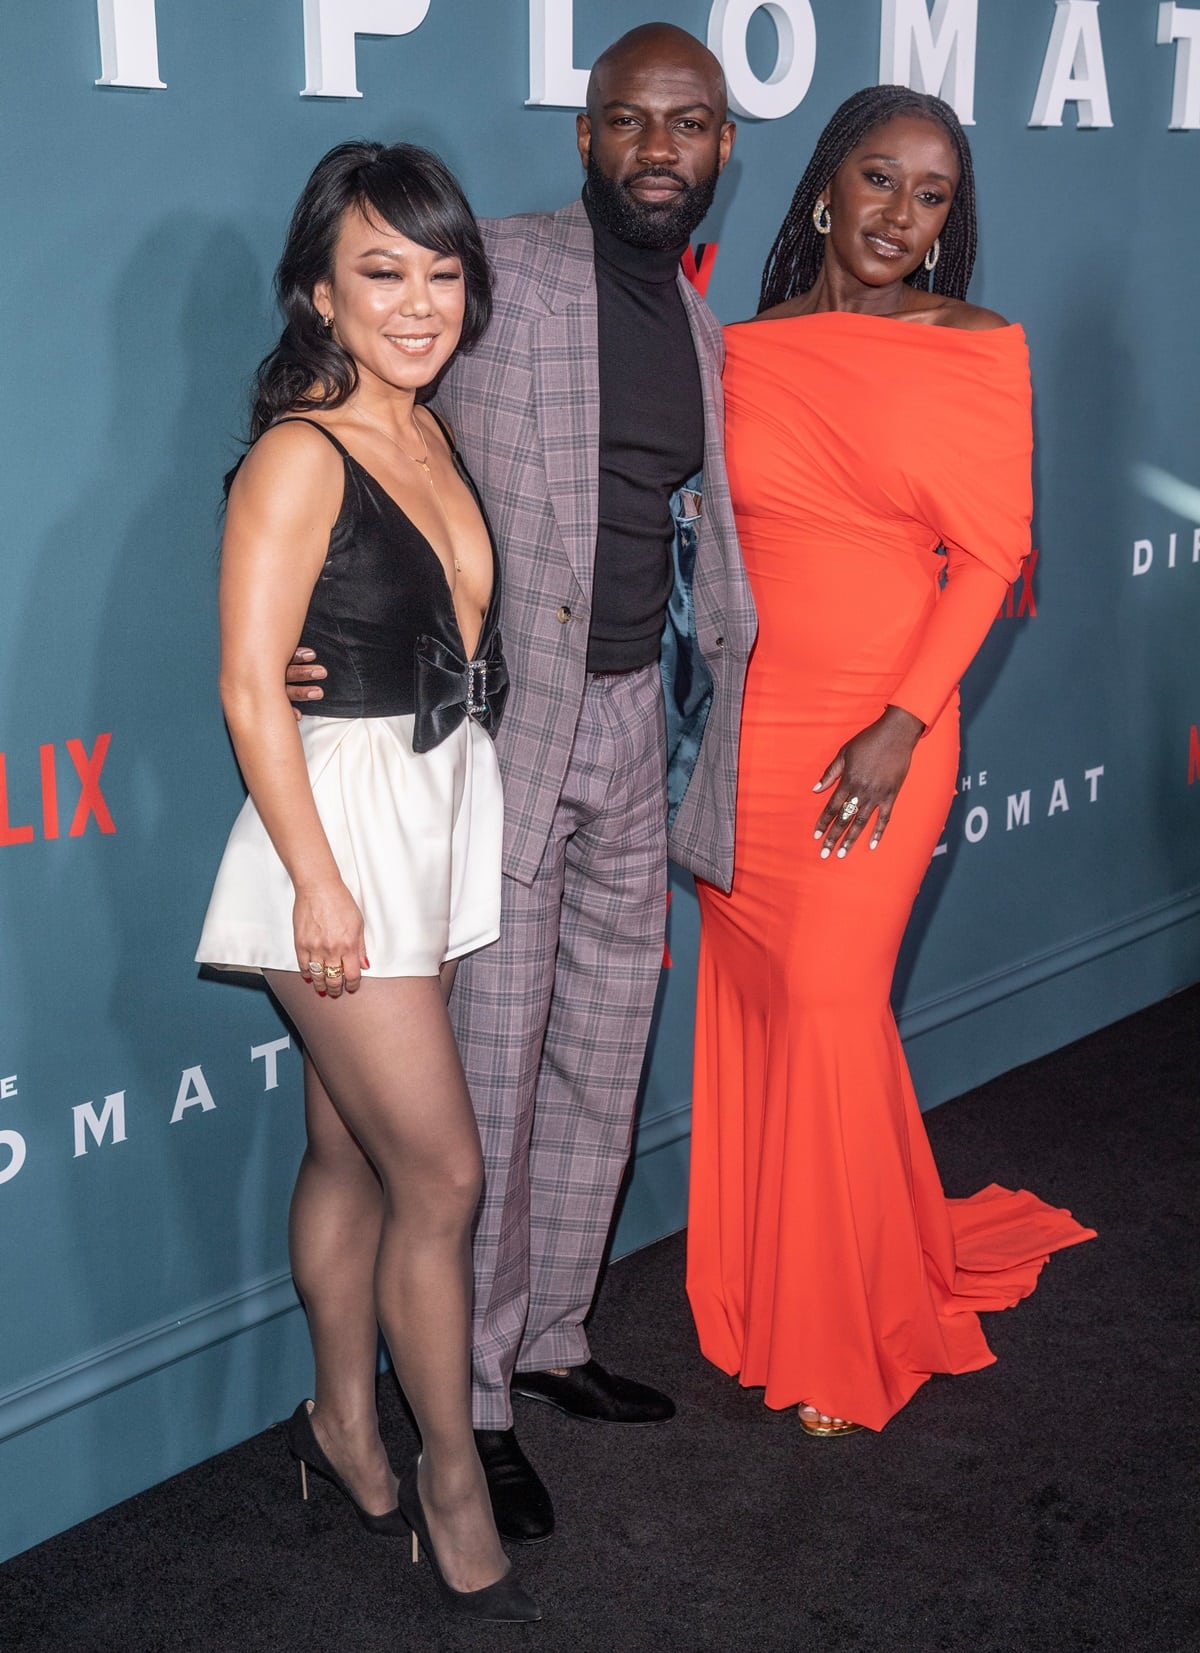 Posing with Ali Ahn and Nana Mensah, David Gyasi is a British actor, standing at 5 feet 9.75 inches (177.2 cm) tall, who is best known for his roles in Interstellar, Cloud Atlas, Shooting Dogs, and the TV show White Heat